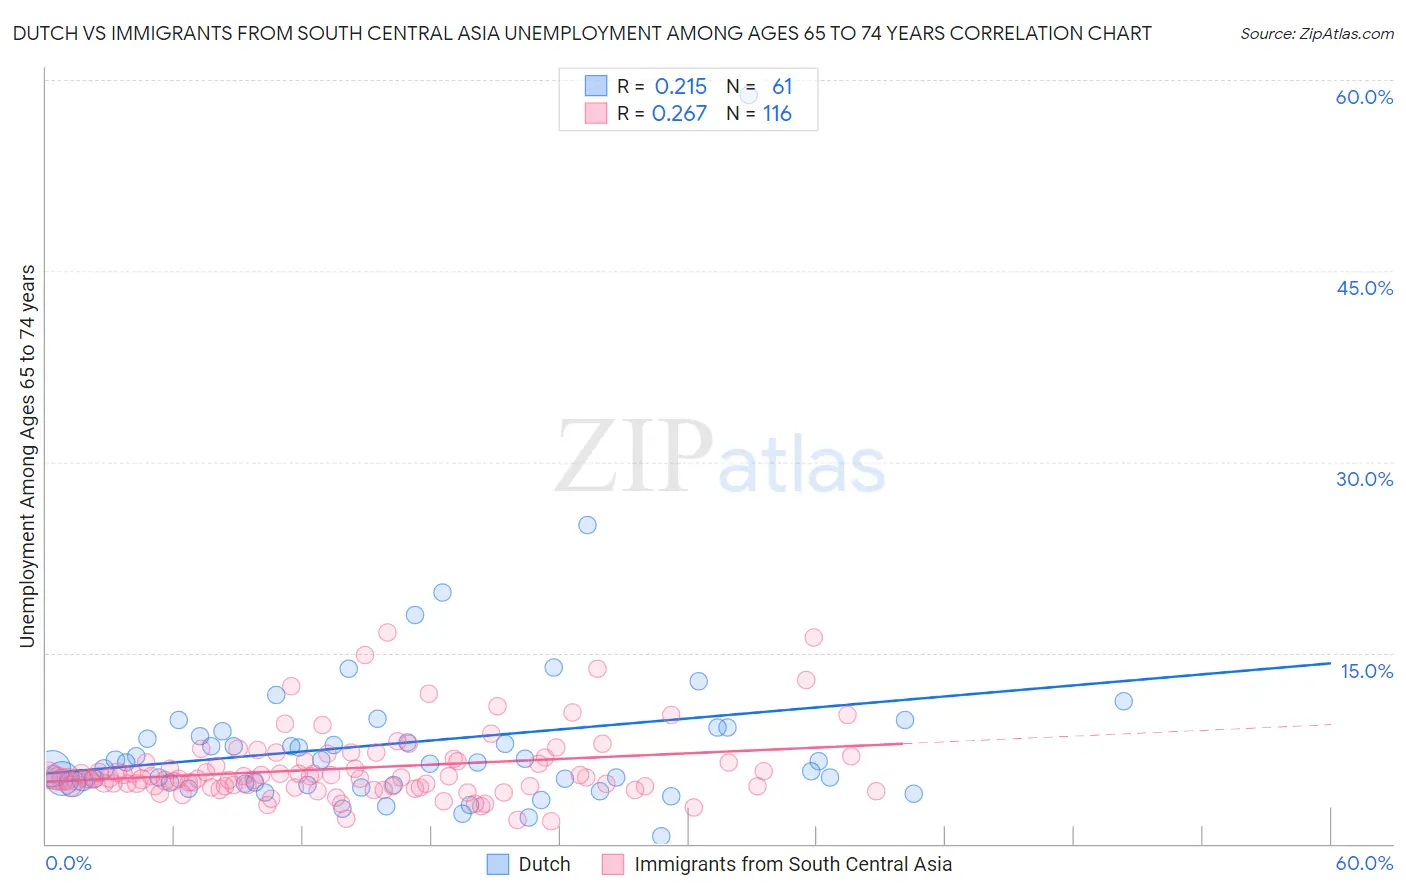 Dutch vs Immigrants from South Central Asia Unemployment Among Ages 65 to 74 years